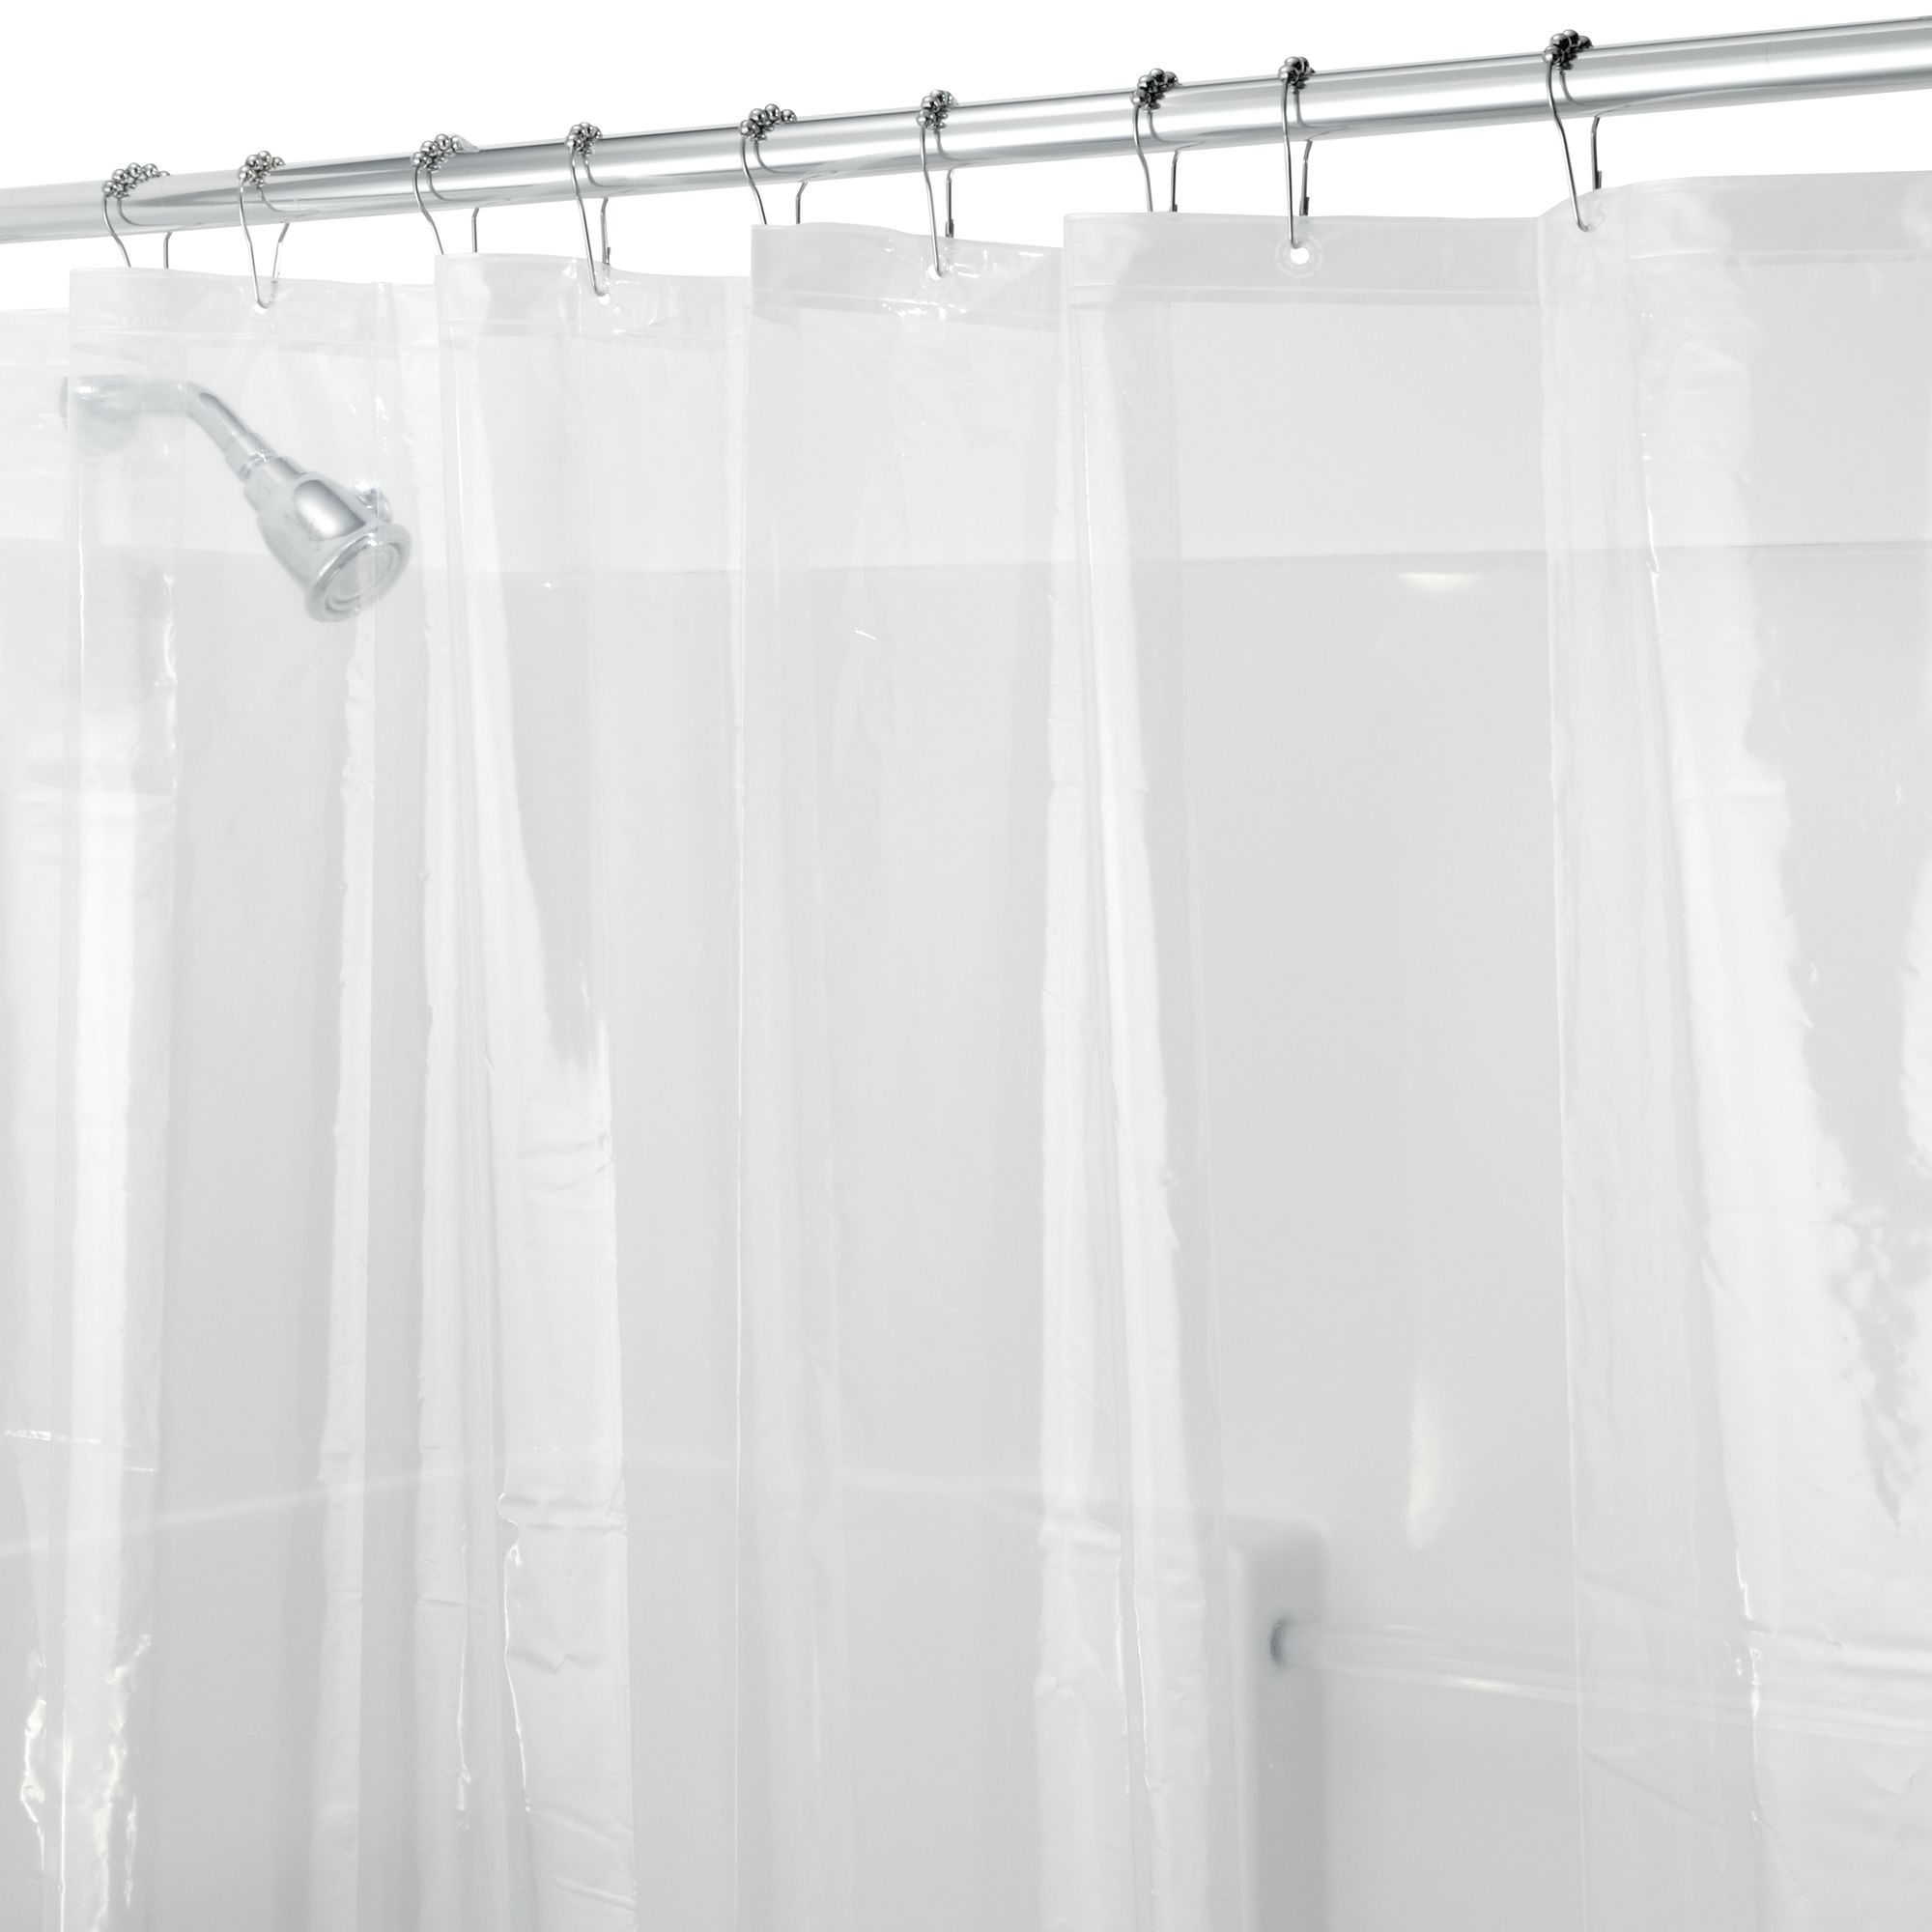 iDesign Clear PVC-Free Mildew Resistant Stall Shower Curtain Liner, 54" x 78" - image 1 of 8